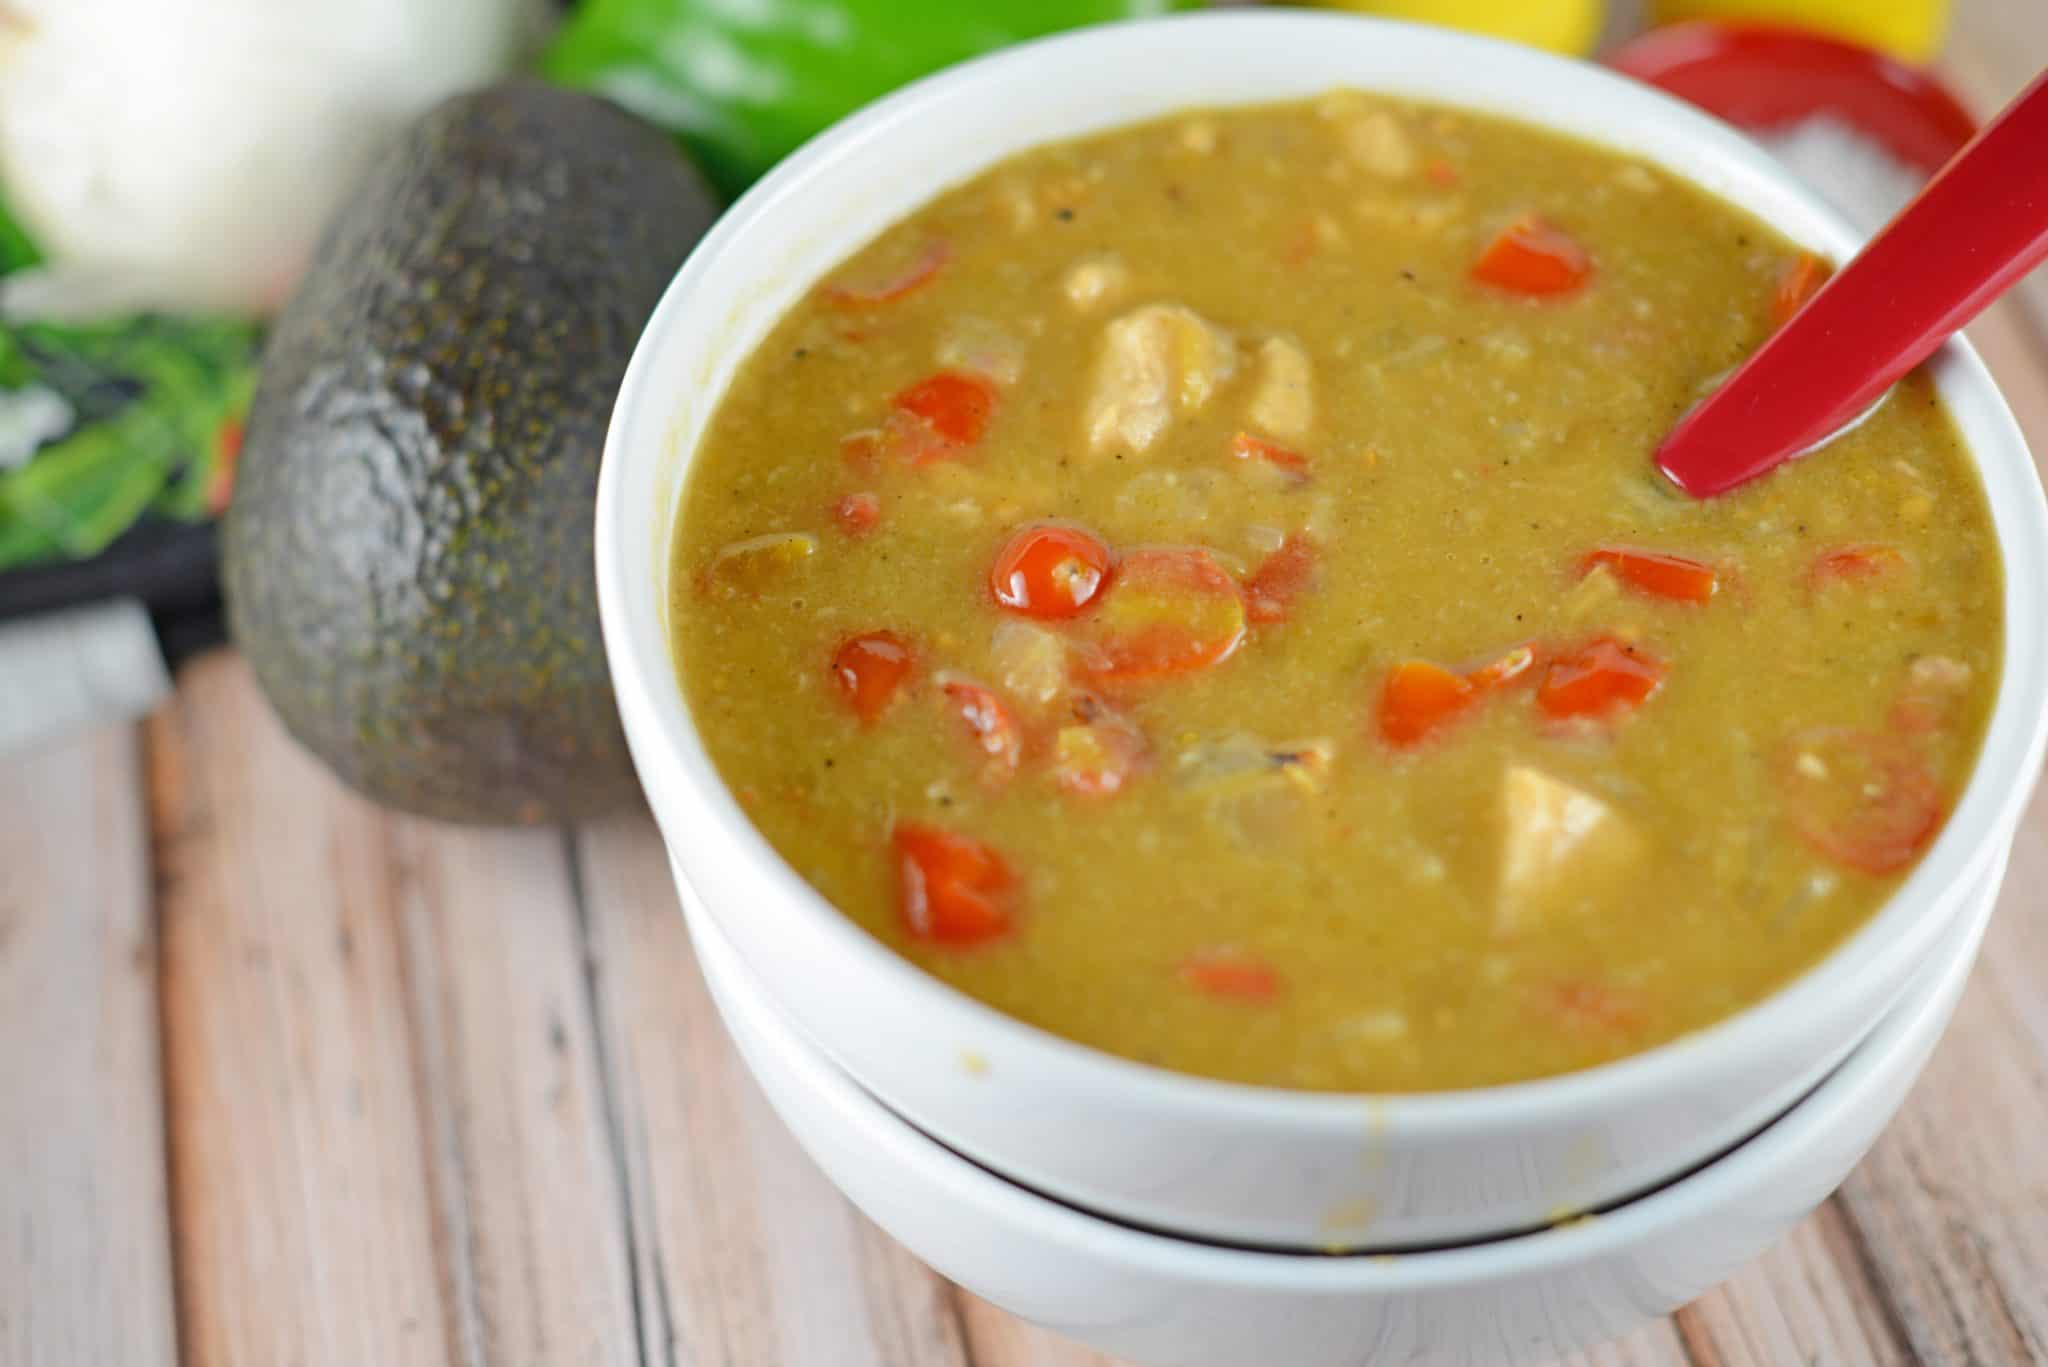 Pork Chili Verde is a wonderful mixture made up of green chilis, tomatoes and spices, best served over giant burritos, eggs, refried beans or in tacos. #porkchilieverde #chiliverderecipe www.savoryexperiments.com